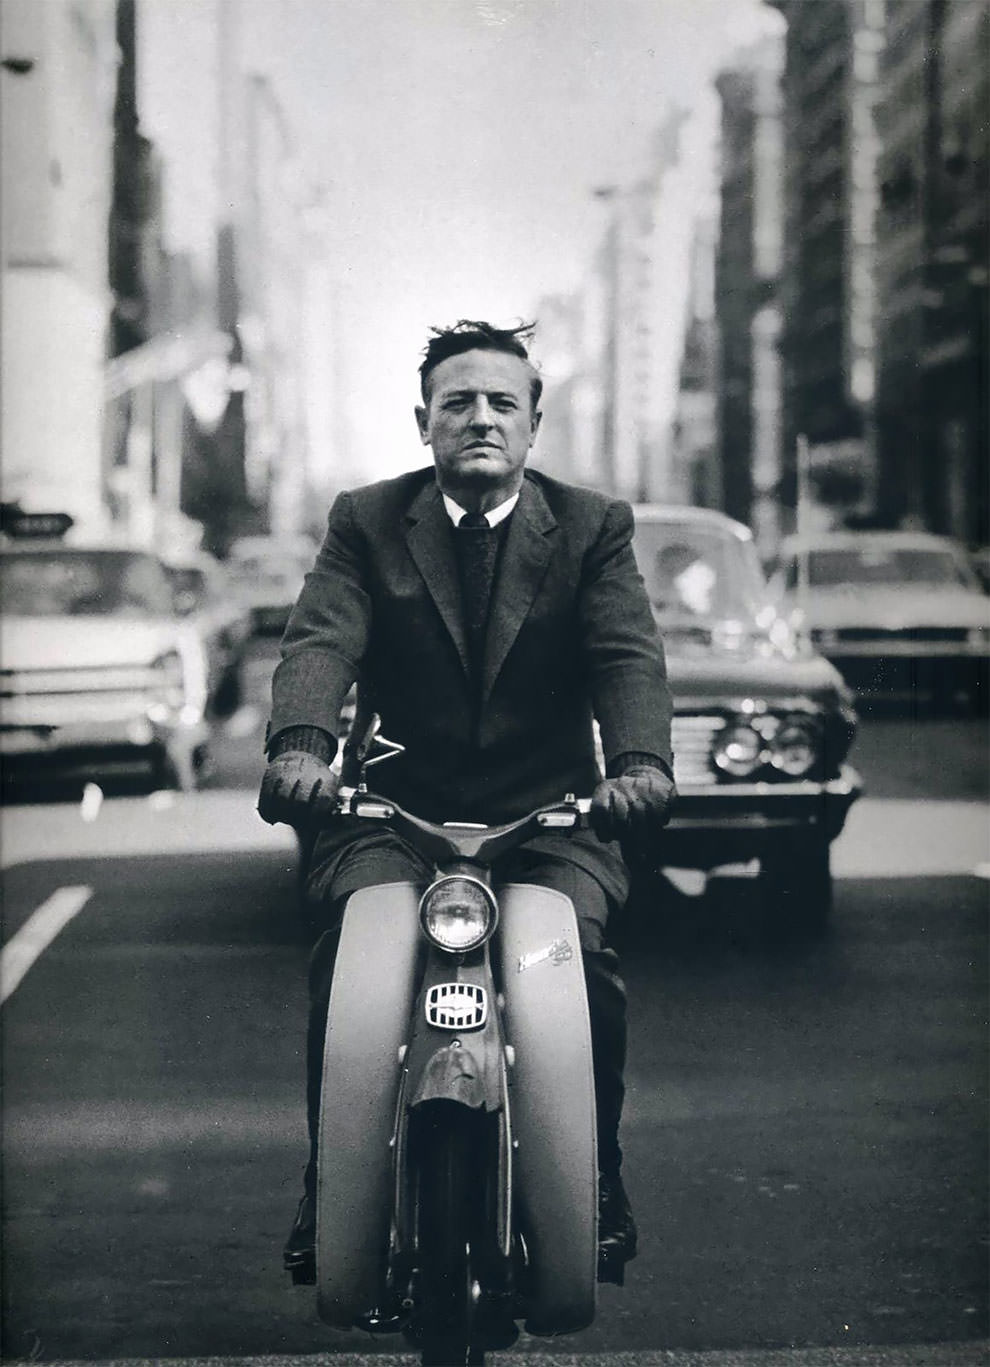 The American writer and editor William F. Buckley Jr. USA. New York City, 1967.